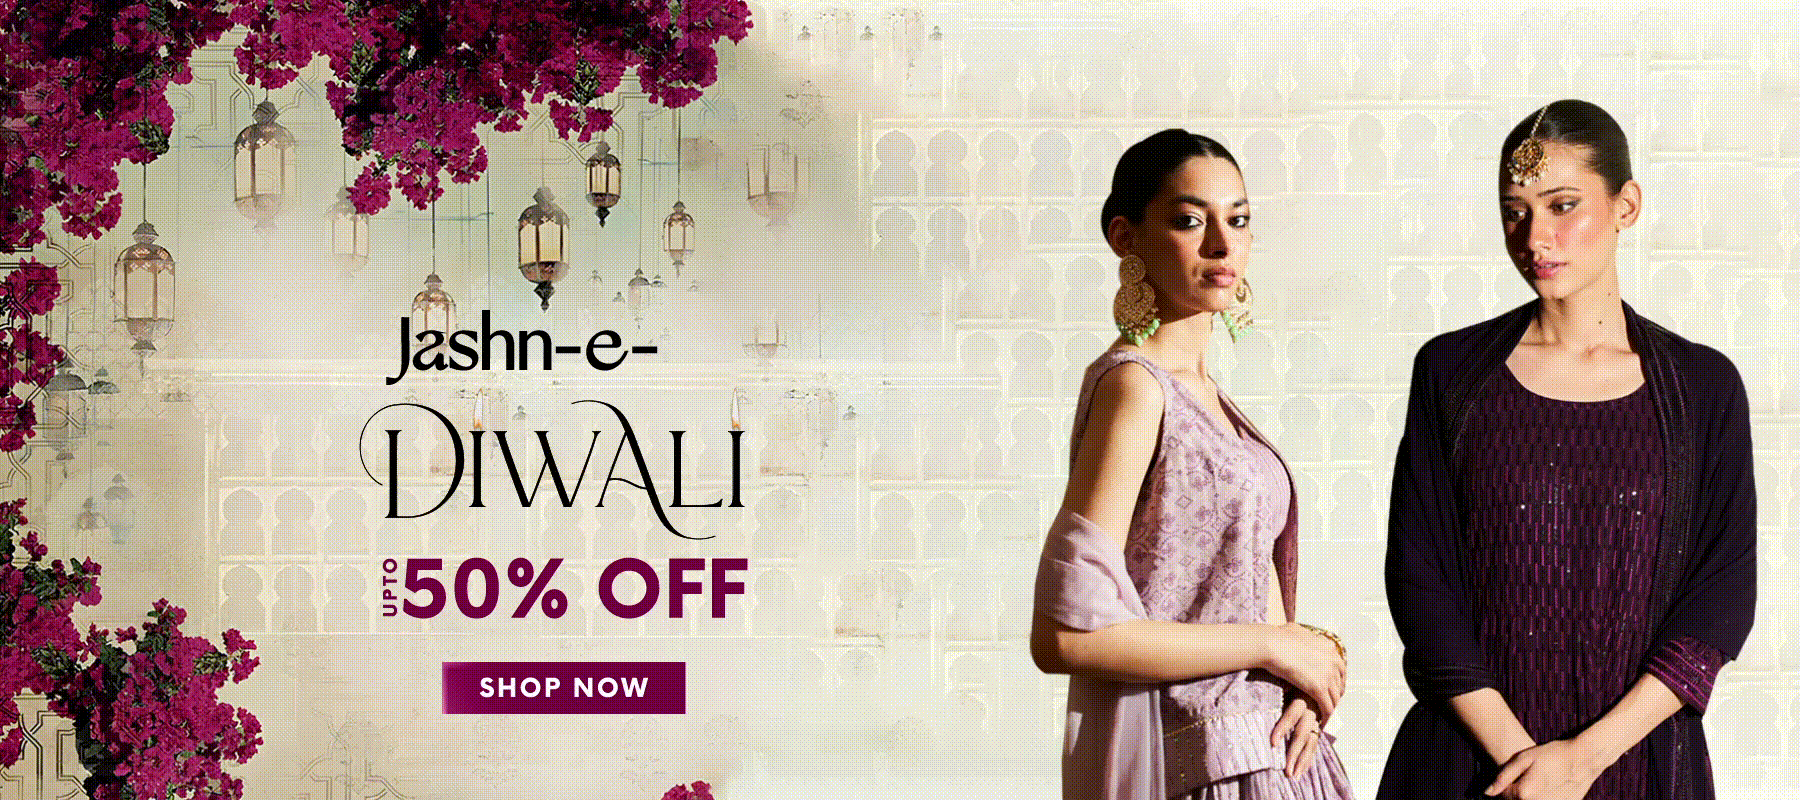 Lulu Hypermarket BUY 1 GET 1 at 50% OFF Casual or formal, classic